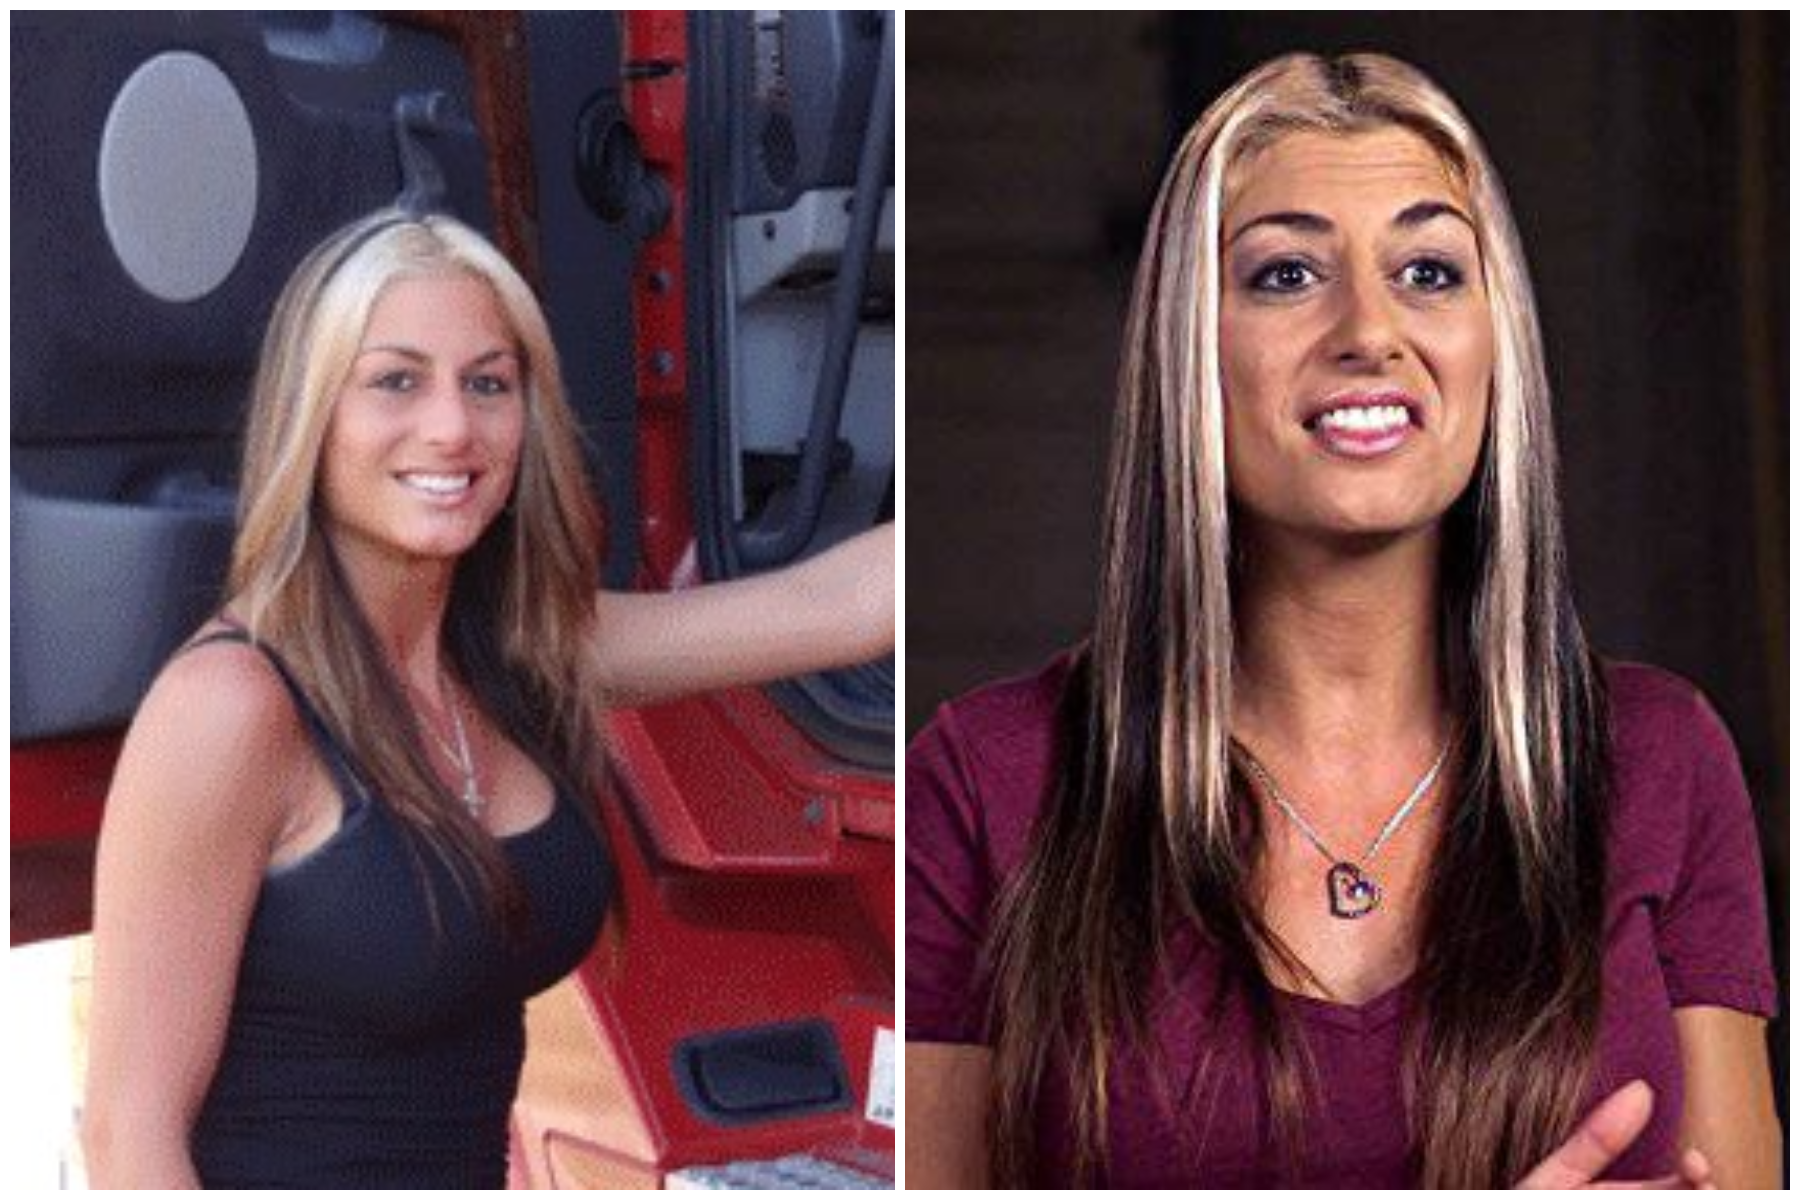 What happened to Jessica Samko of Shipping Wars